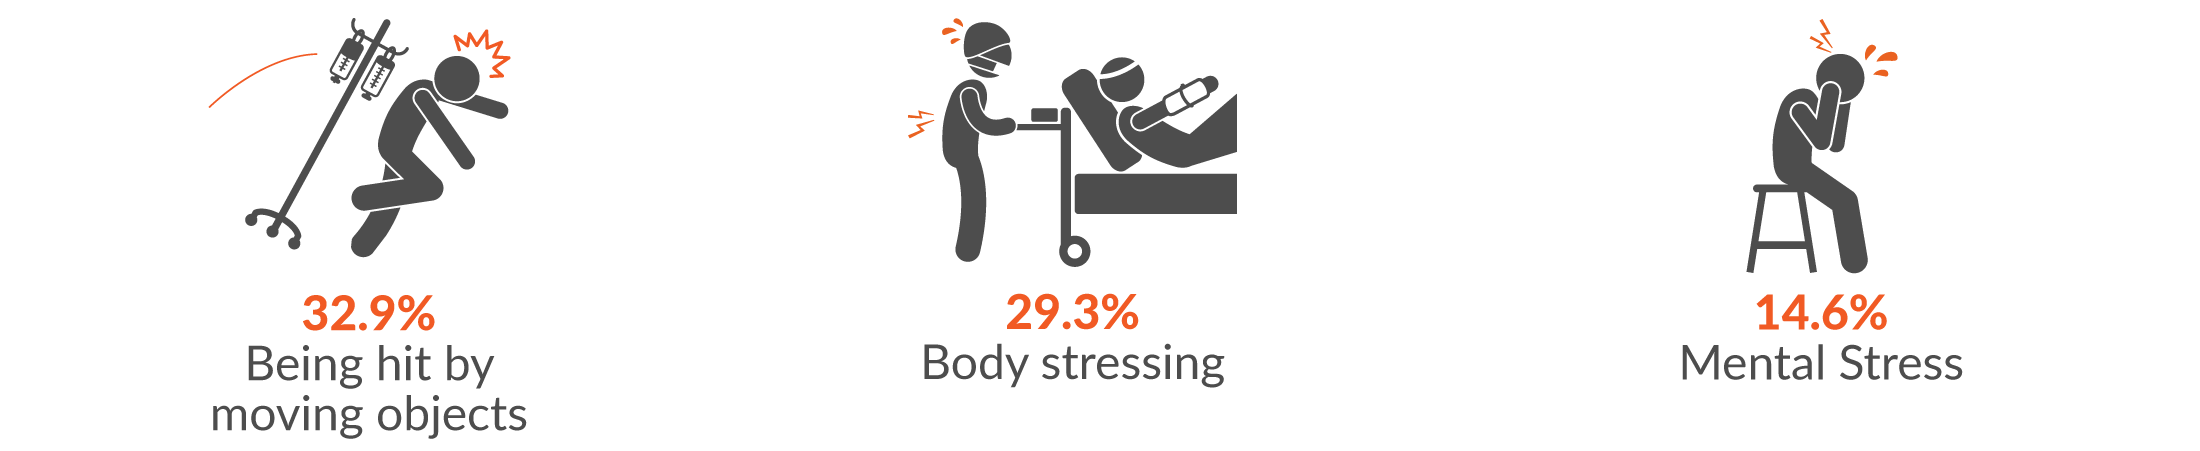 This infographic shows the main three mechanisms of serious injury for health and community services claims were 32.9% being hit by moving objects; 29.3% body stressing; and 14.6% mental stress.